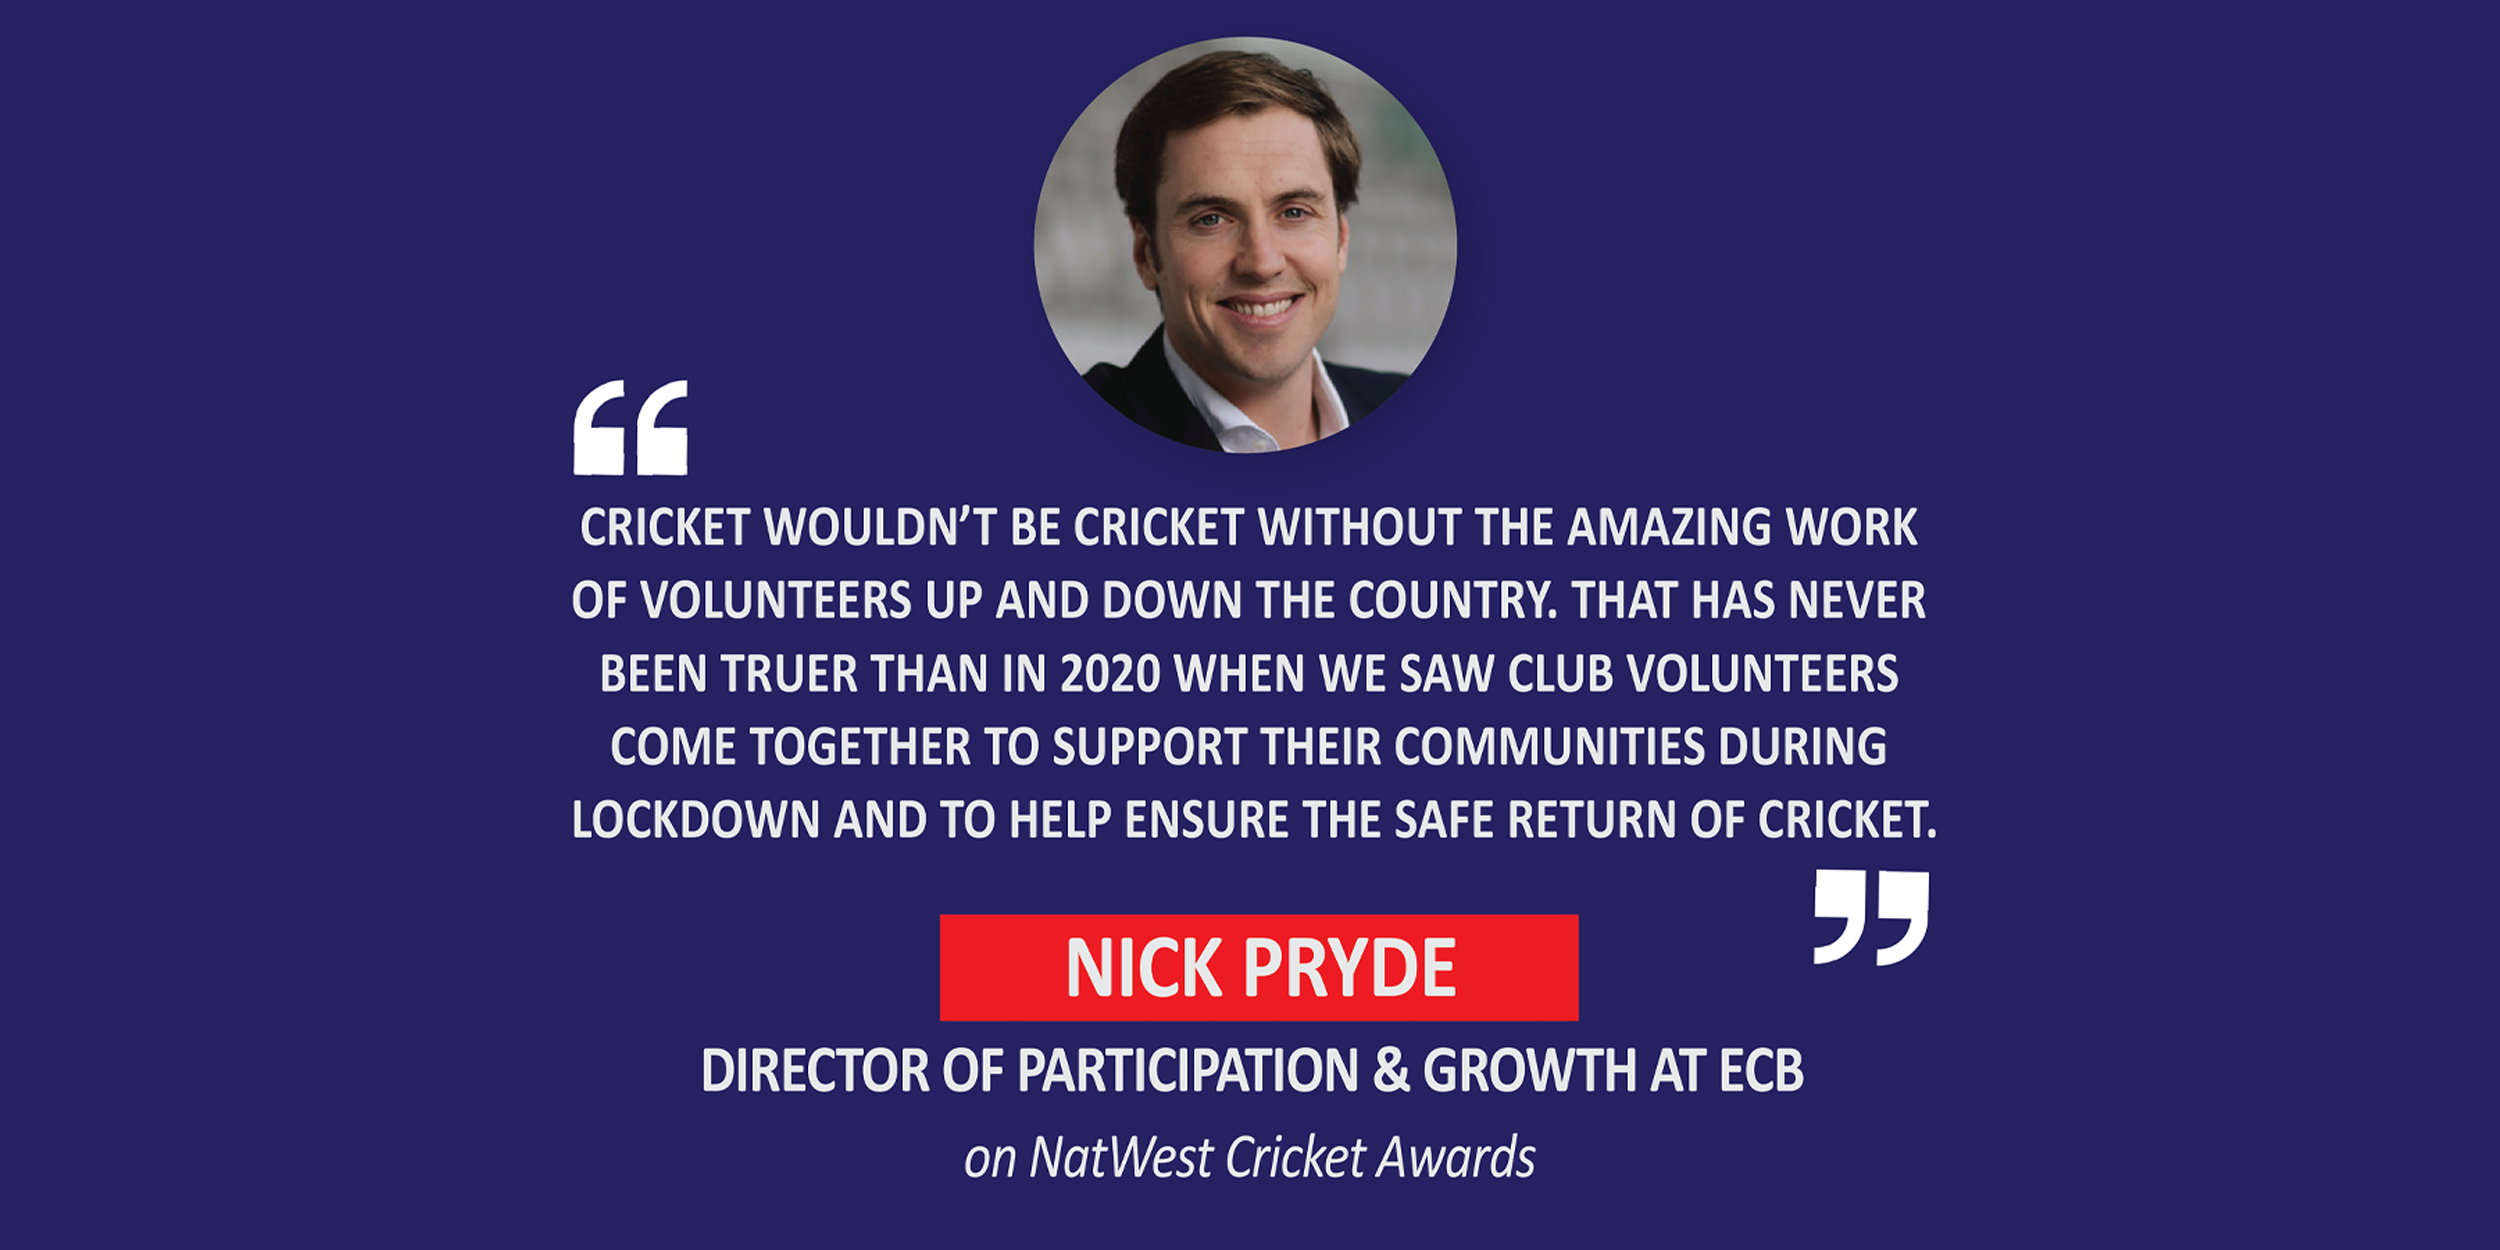 Nick Pryde, Director of Participation & Growth, ECB on NatWest Cricket Awards